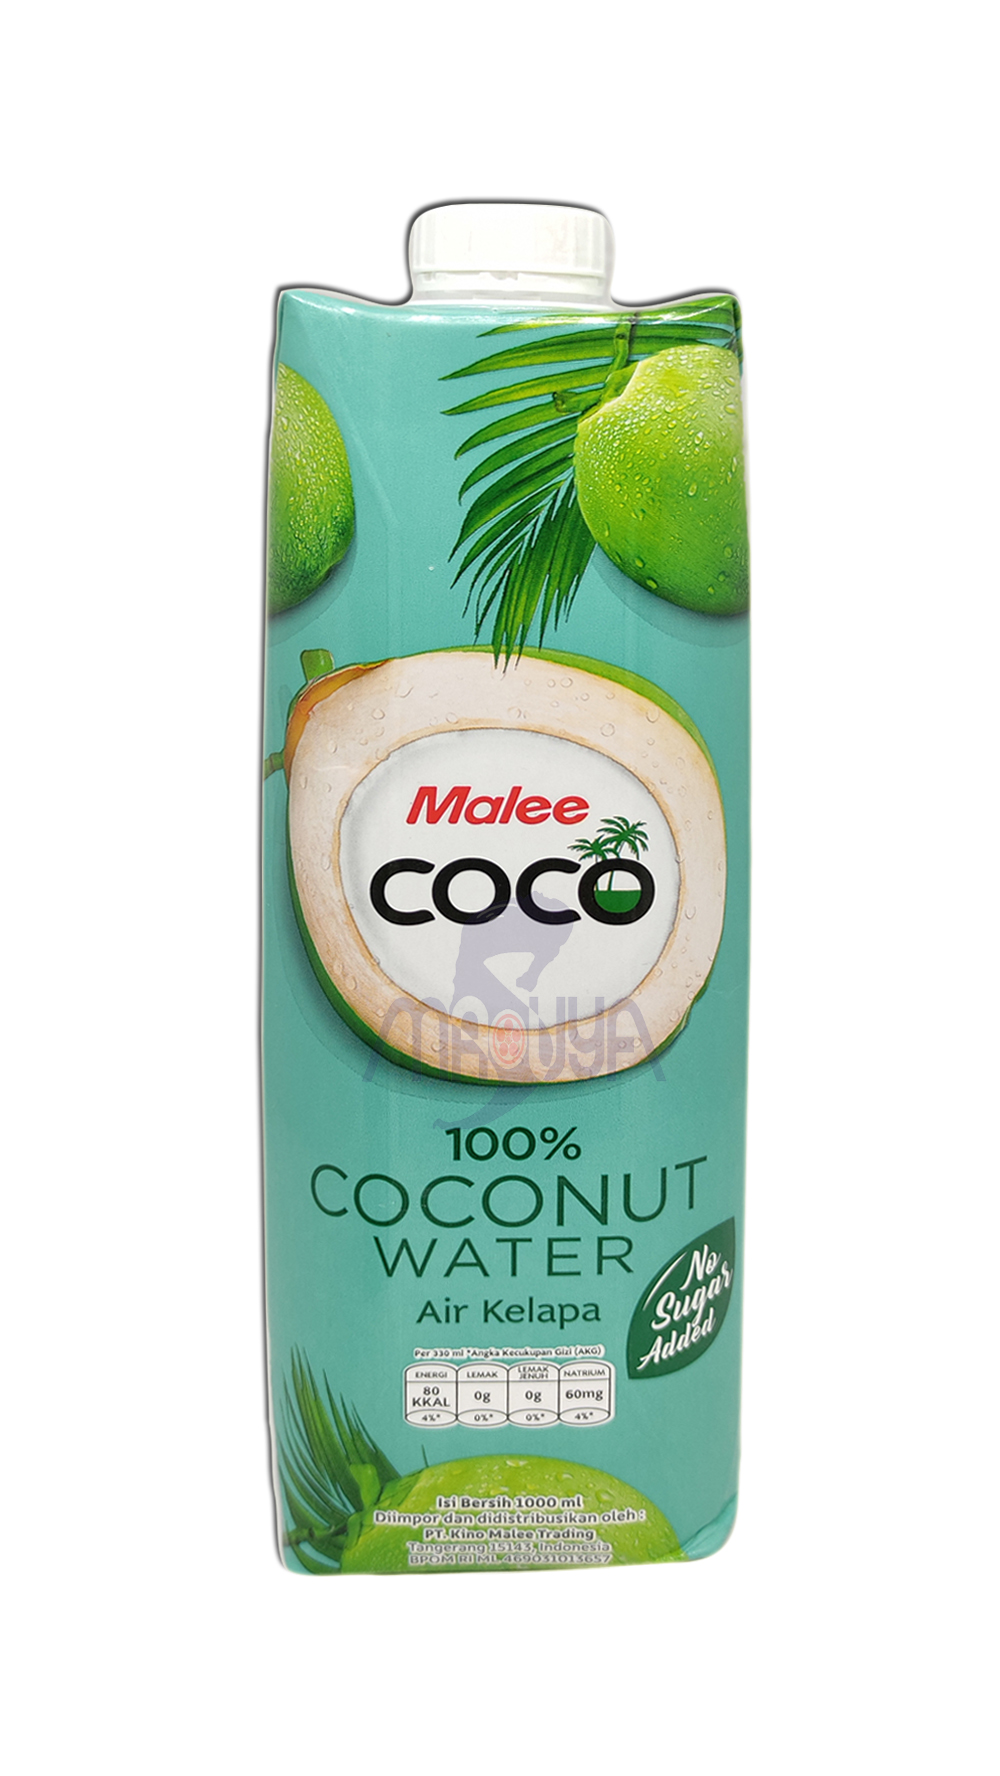 Malee Coco 100% Coconut Water 1000 ml